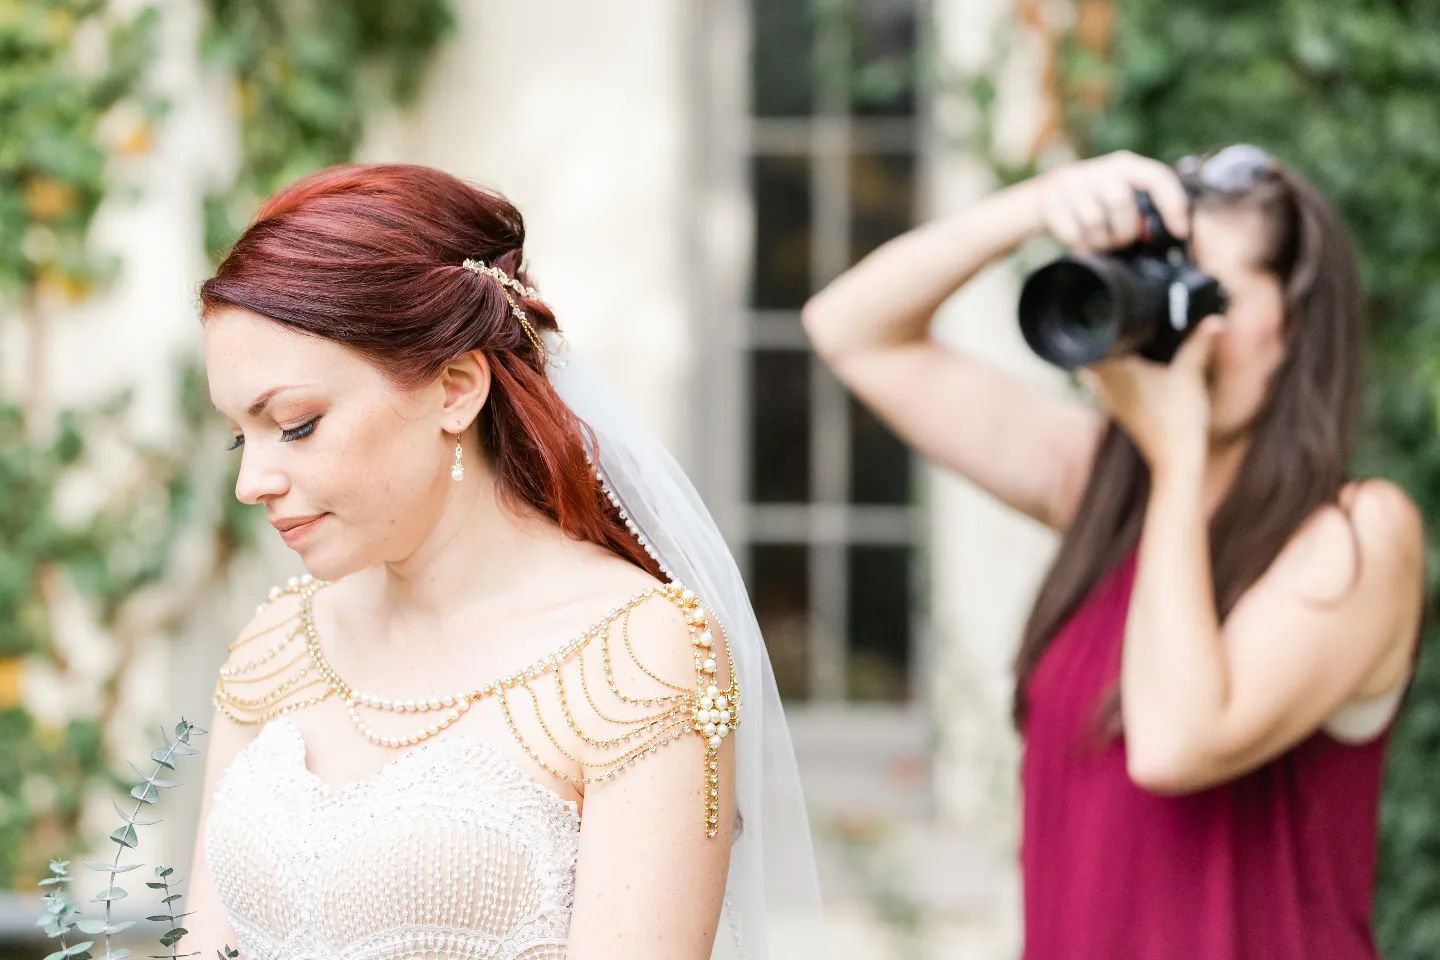 sandra henderson takes a photo of a bride for her wedding photography portfolio